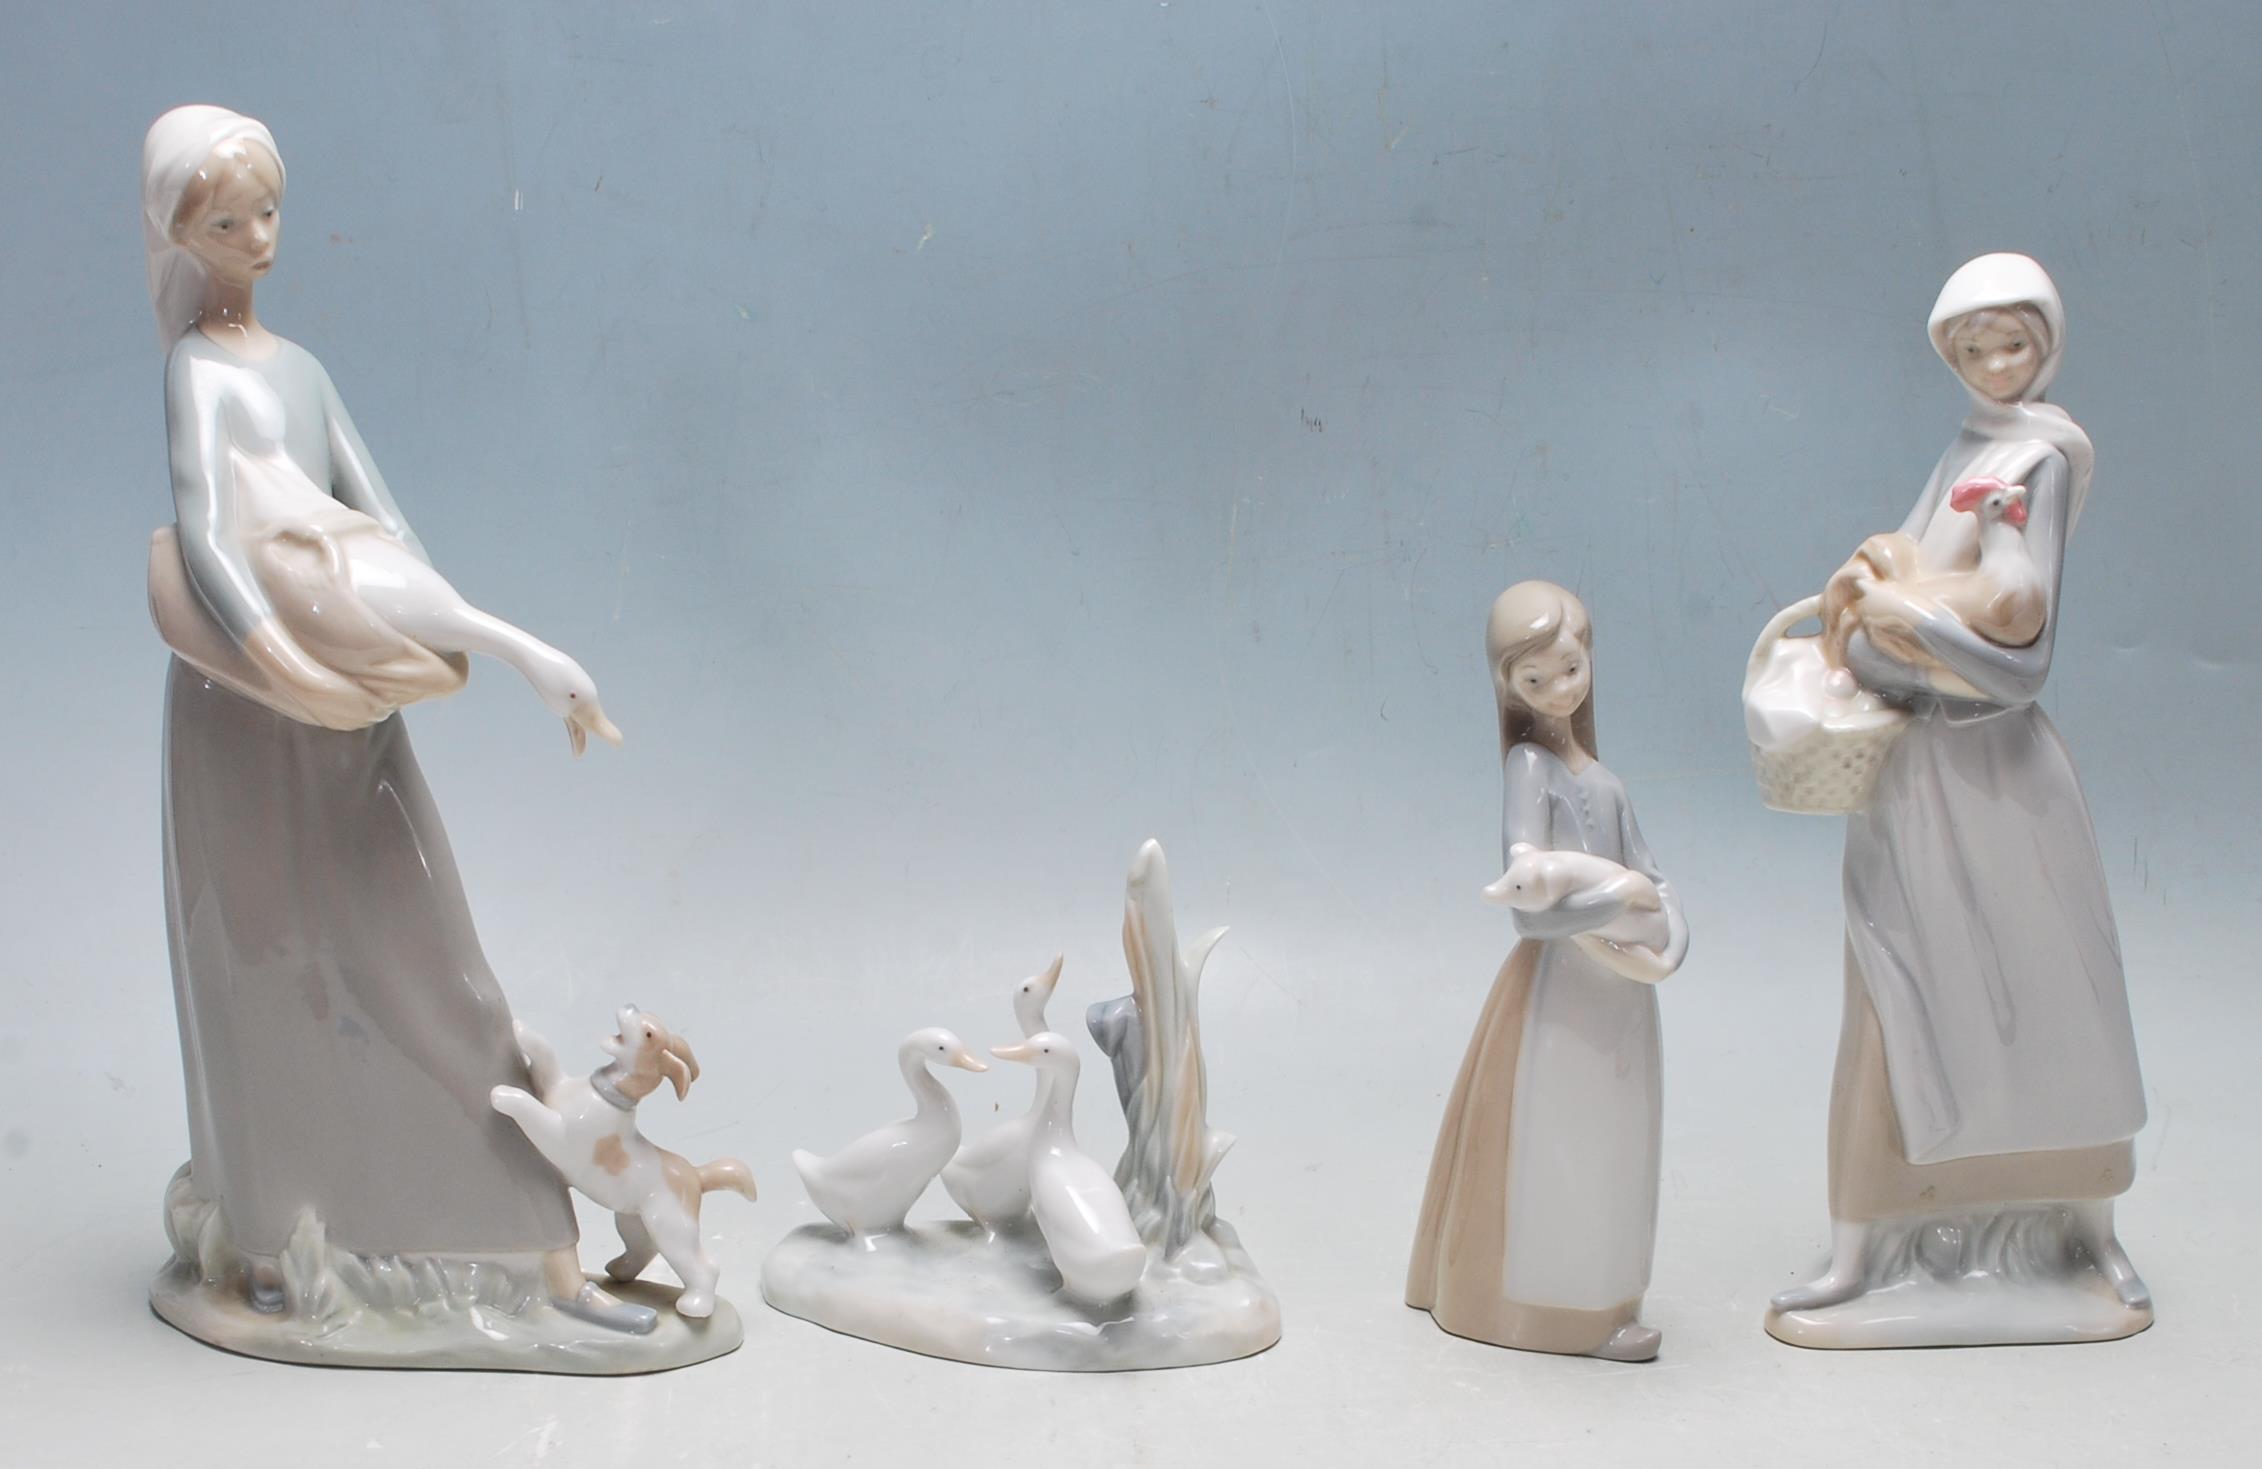 COLELCTION OF LATE 20TH CENTURY LLADRO FIGURINES - Image 2 of 7